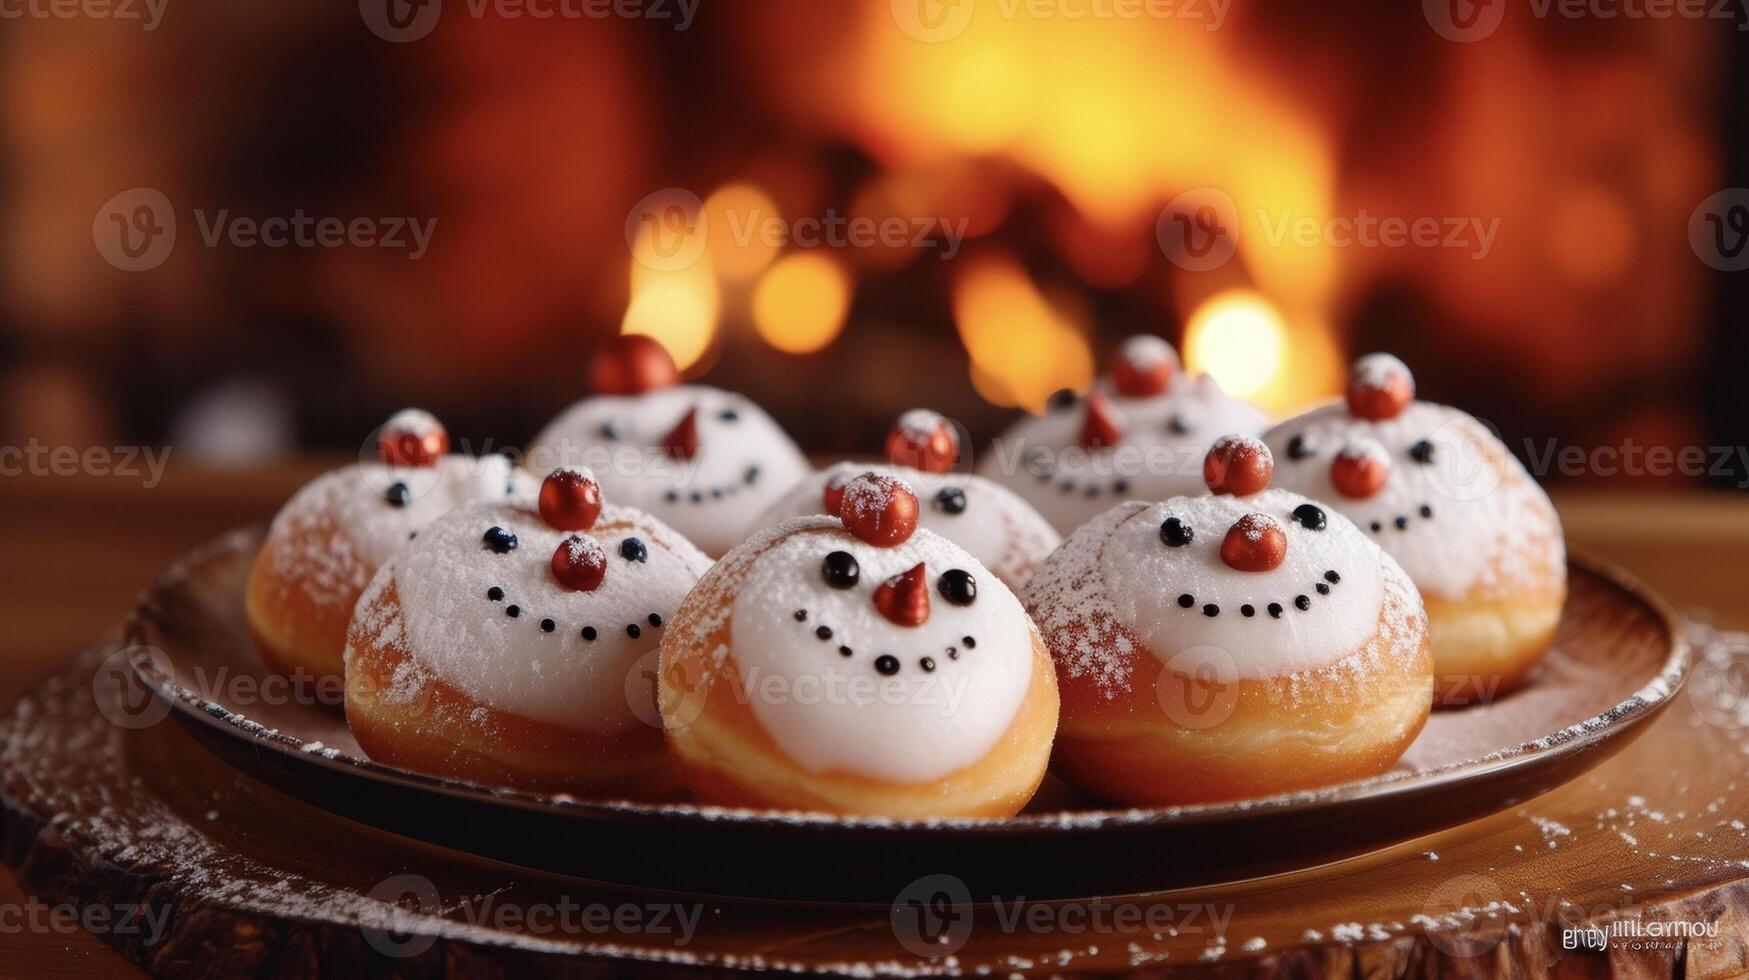 A plate of fluffy donuts dusted with powdered sugar and decorated with jolly snowman faces p in front of a roaring fire. These festive treats are sure to warm your heart an photo